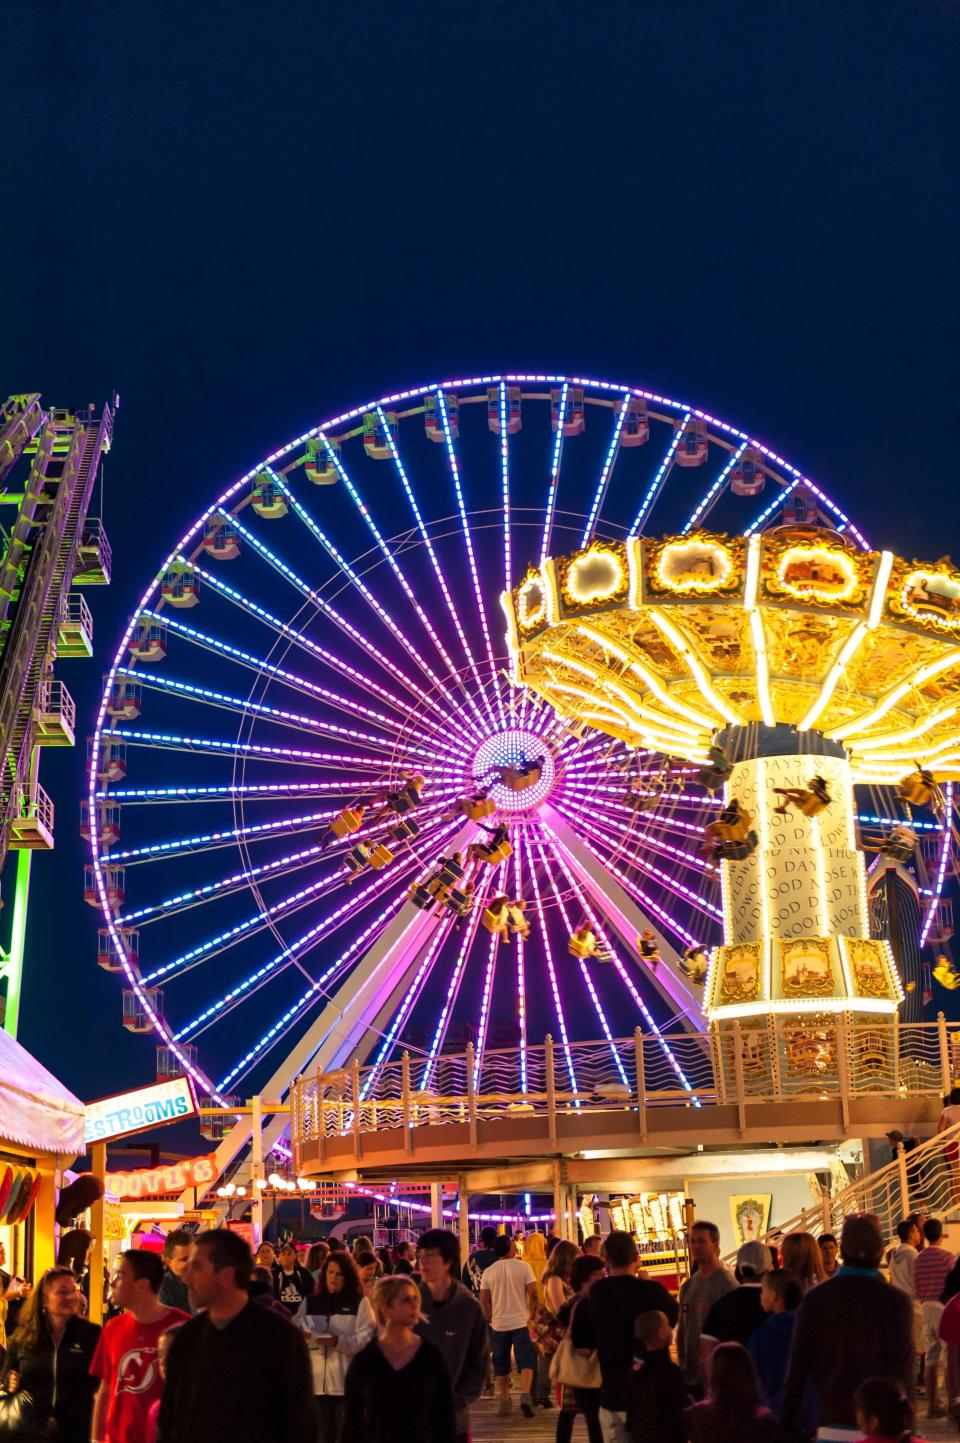 The Giant Wheel on Morey's Piers in Wildwood is illuminated by 92,400 lights.